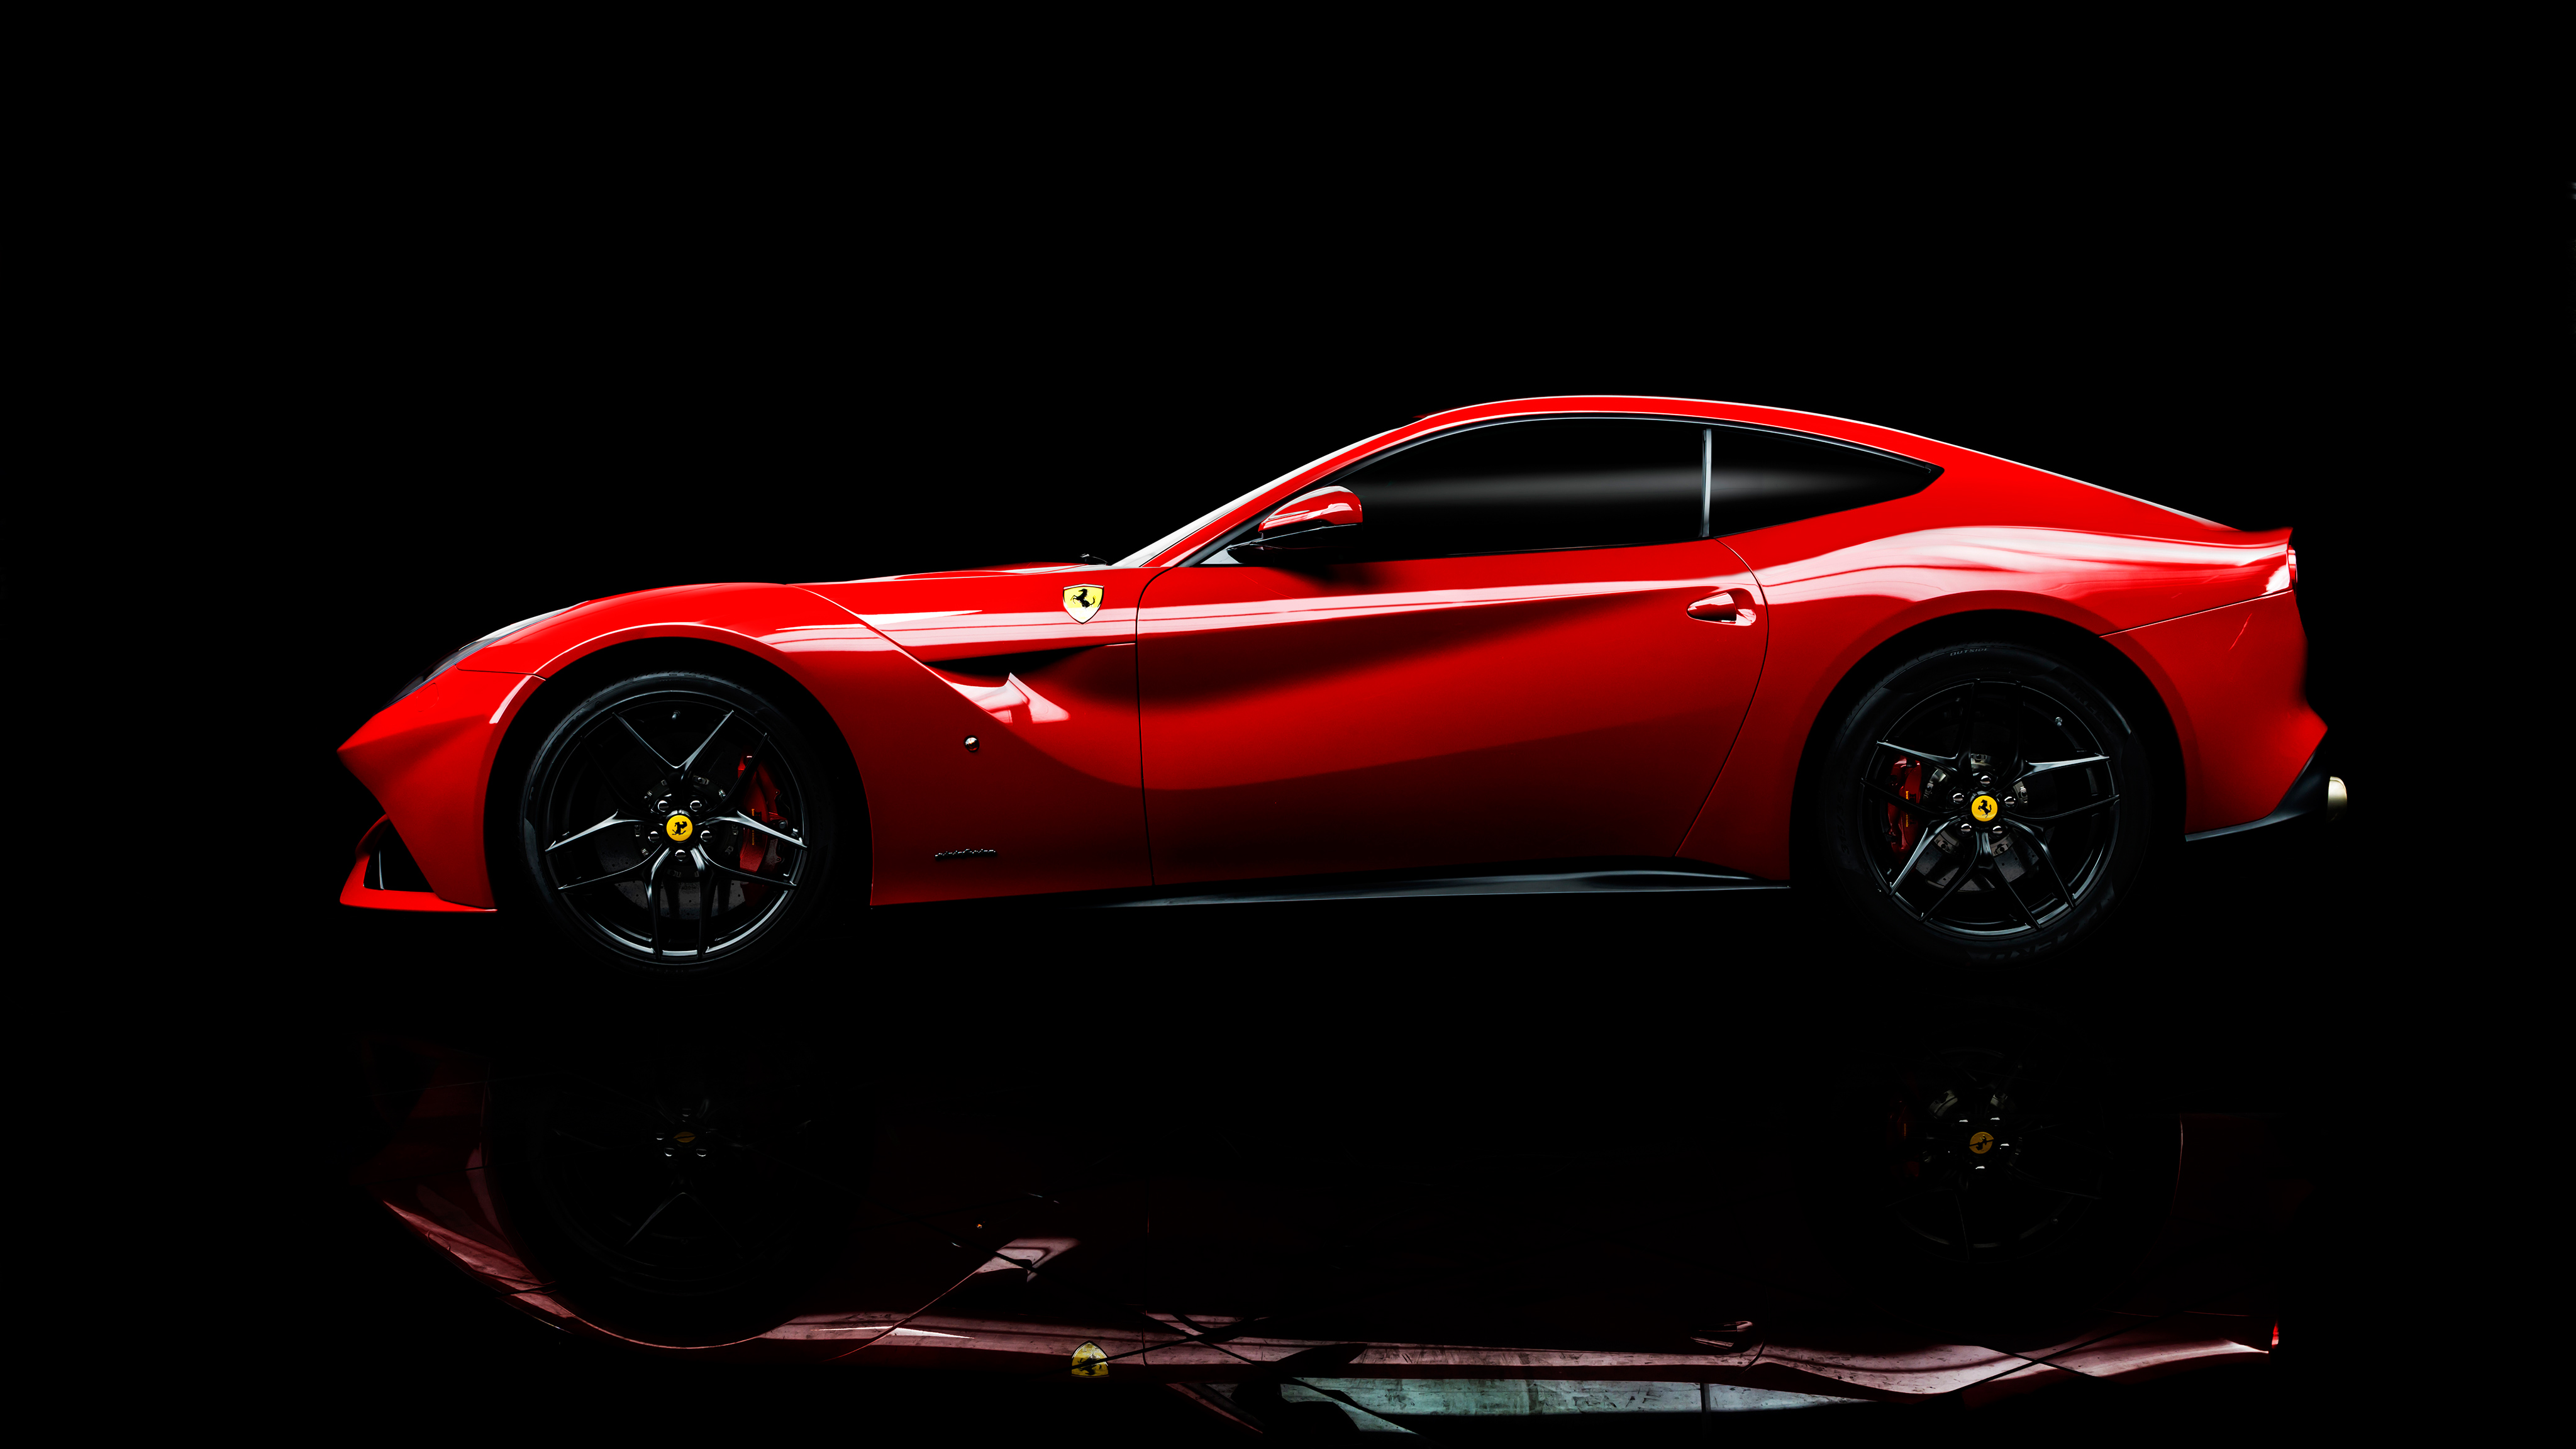 9 Nissan Ferrari f12 2016 pc wallpaper there are numerous from 2012-2021 